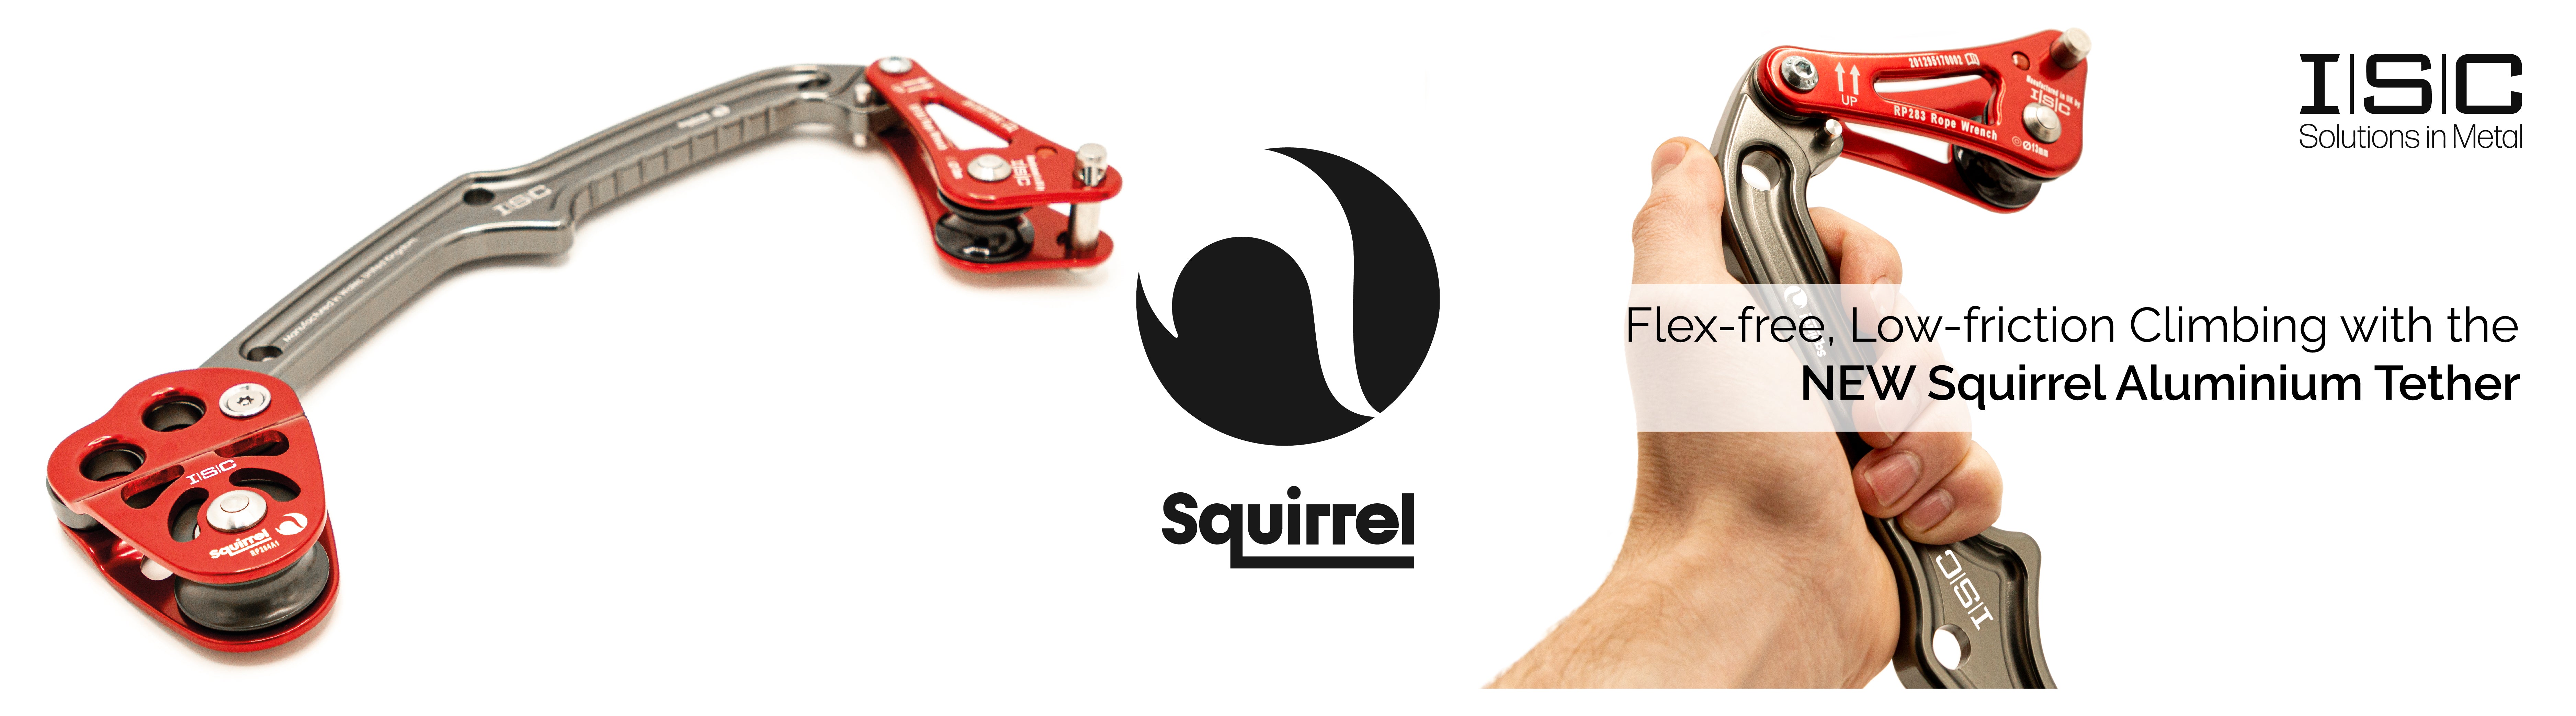 NEW PRODUCT LAUNCH - ISC Squirrel Tether